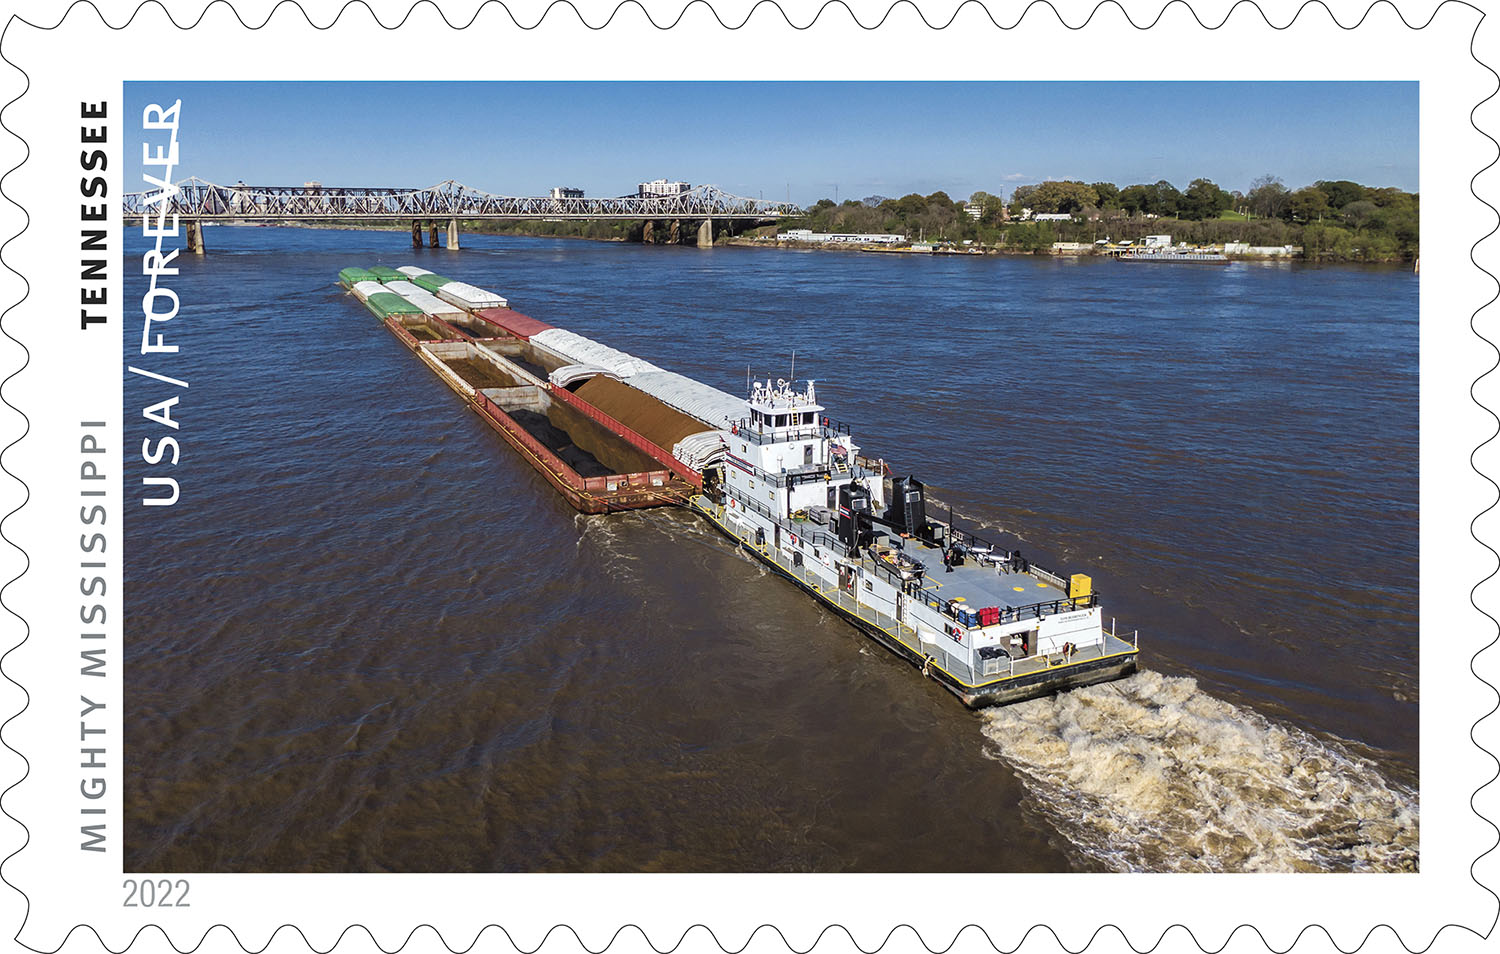 The Mighty Mississippi stamp for Tennessee includes an image of a towboat pushing barges. (Image courtesy of U.S. Postal Service)